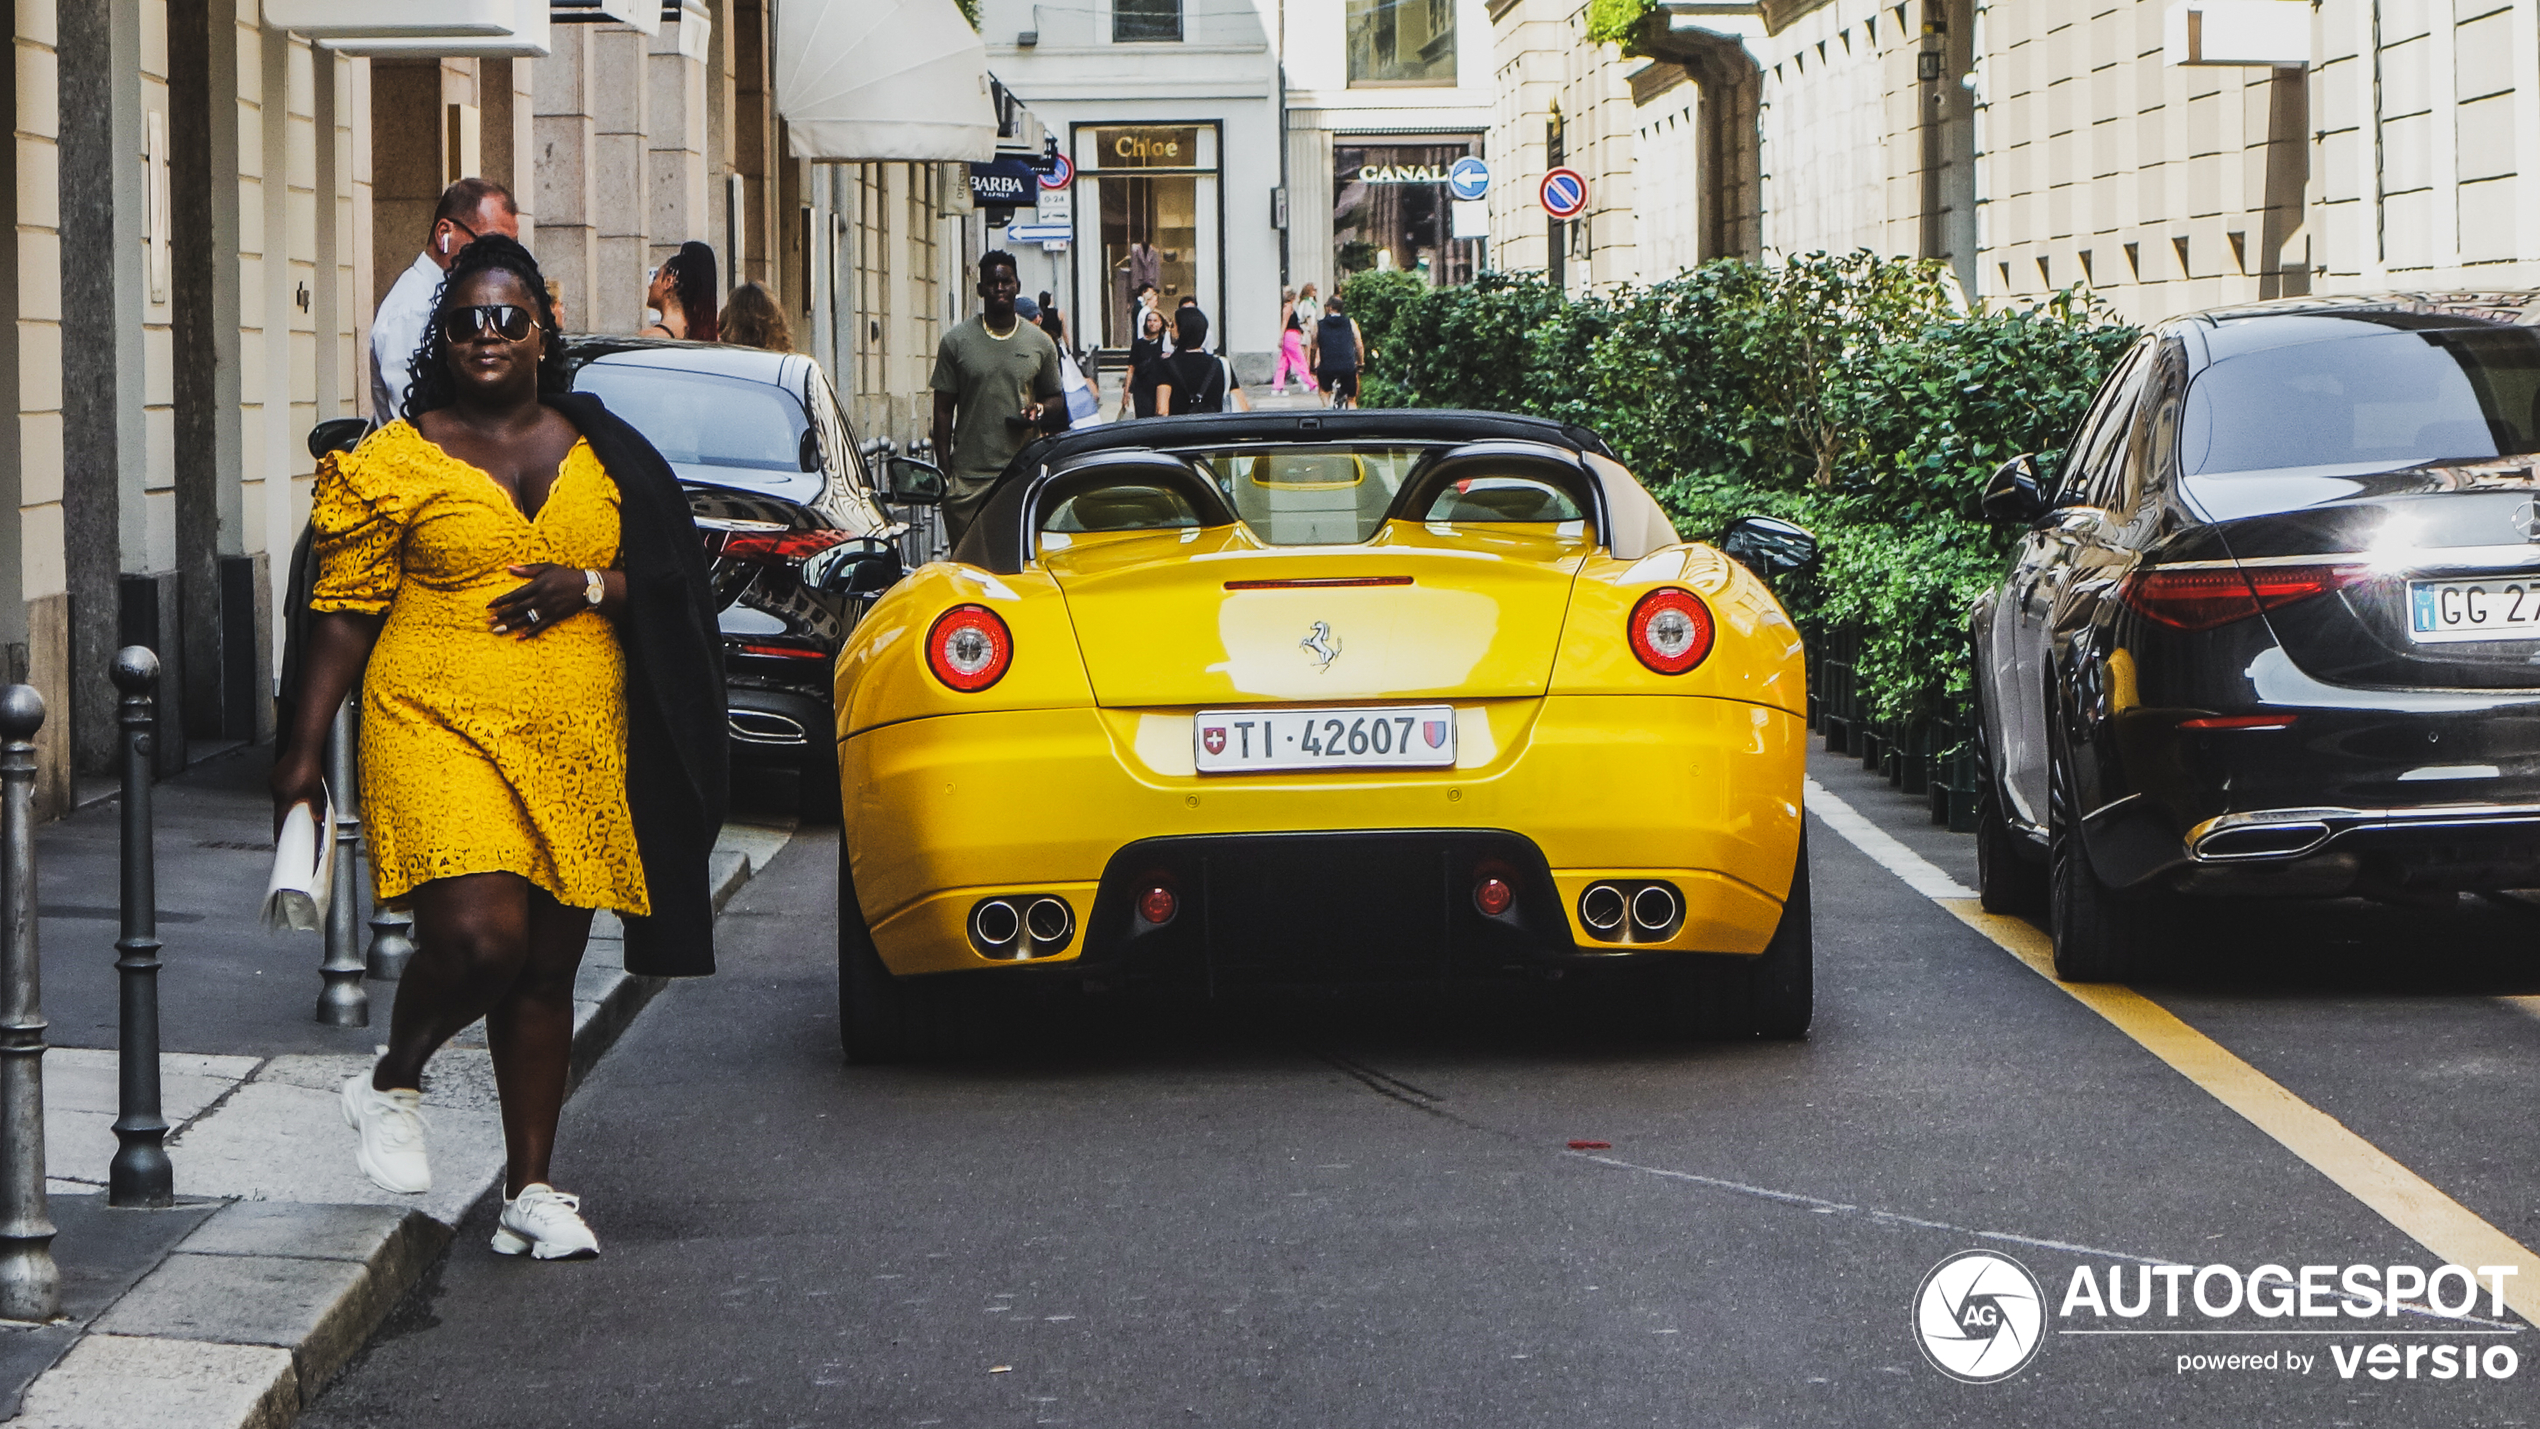 After years again a yellow SA Aperta